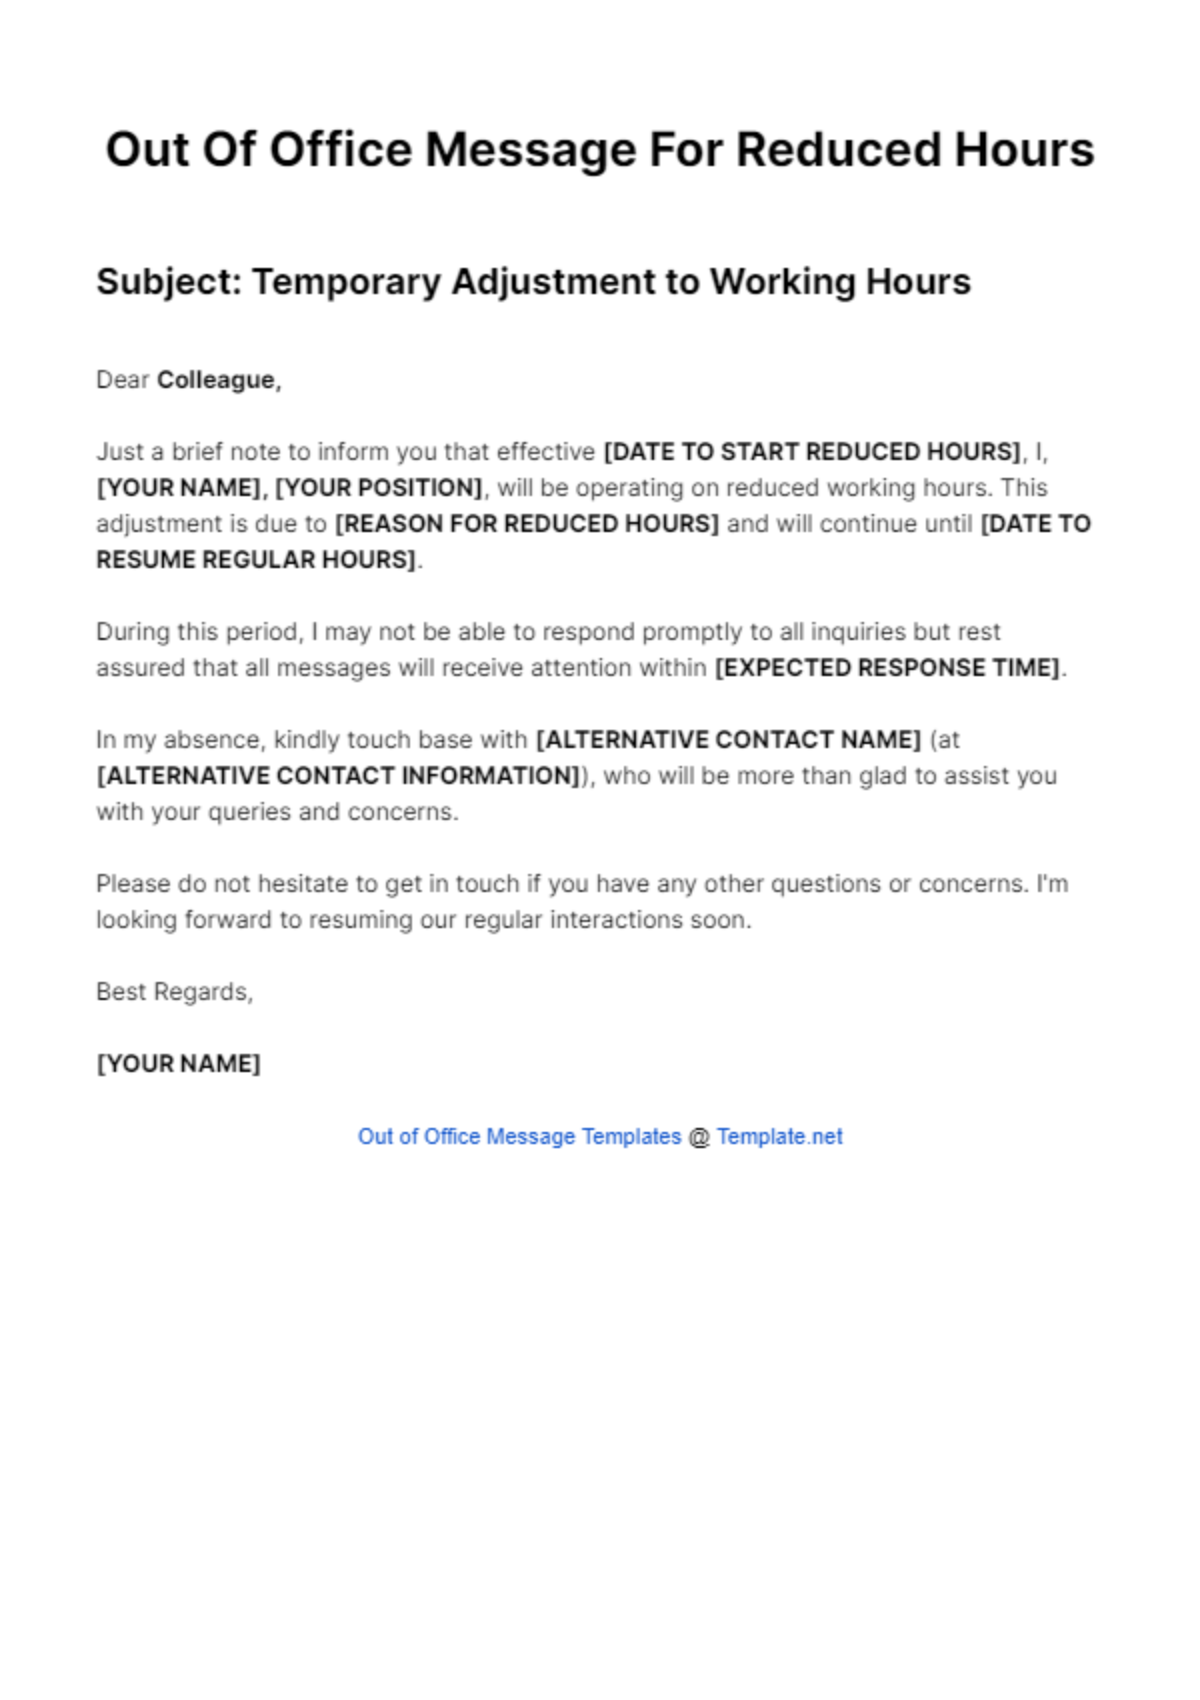 Out Of Office Message For Reduced Hours Template